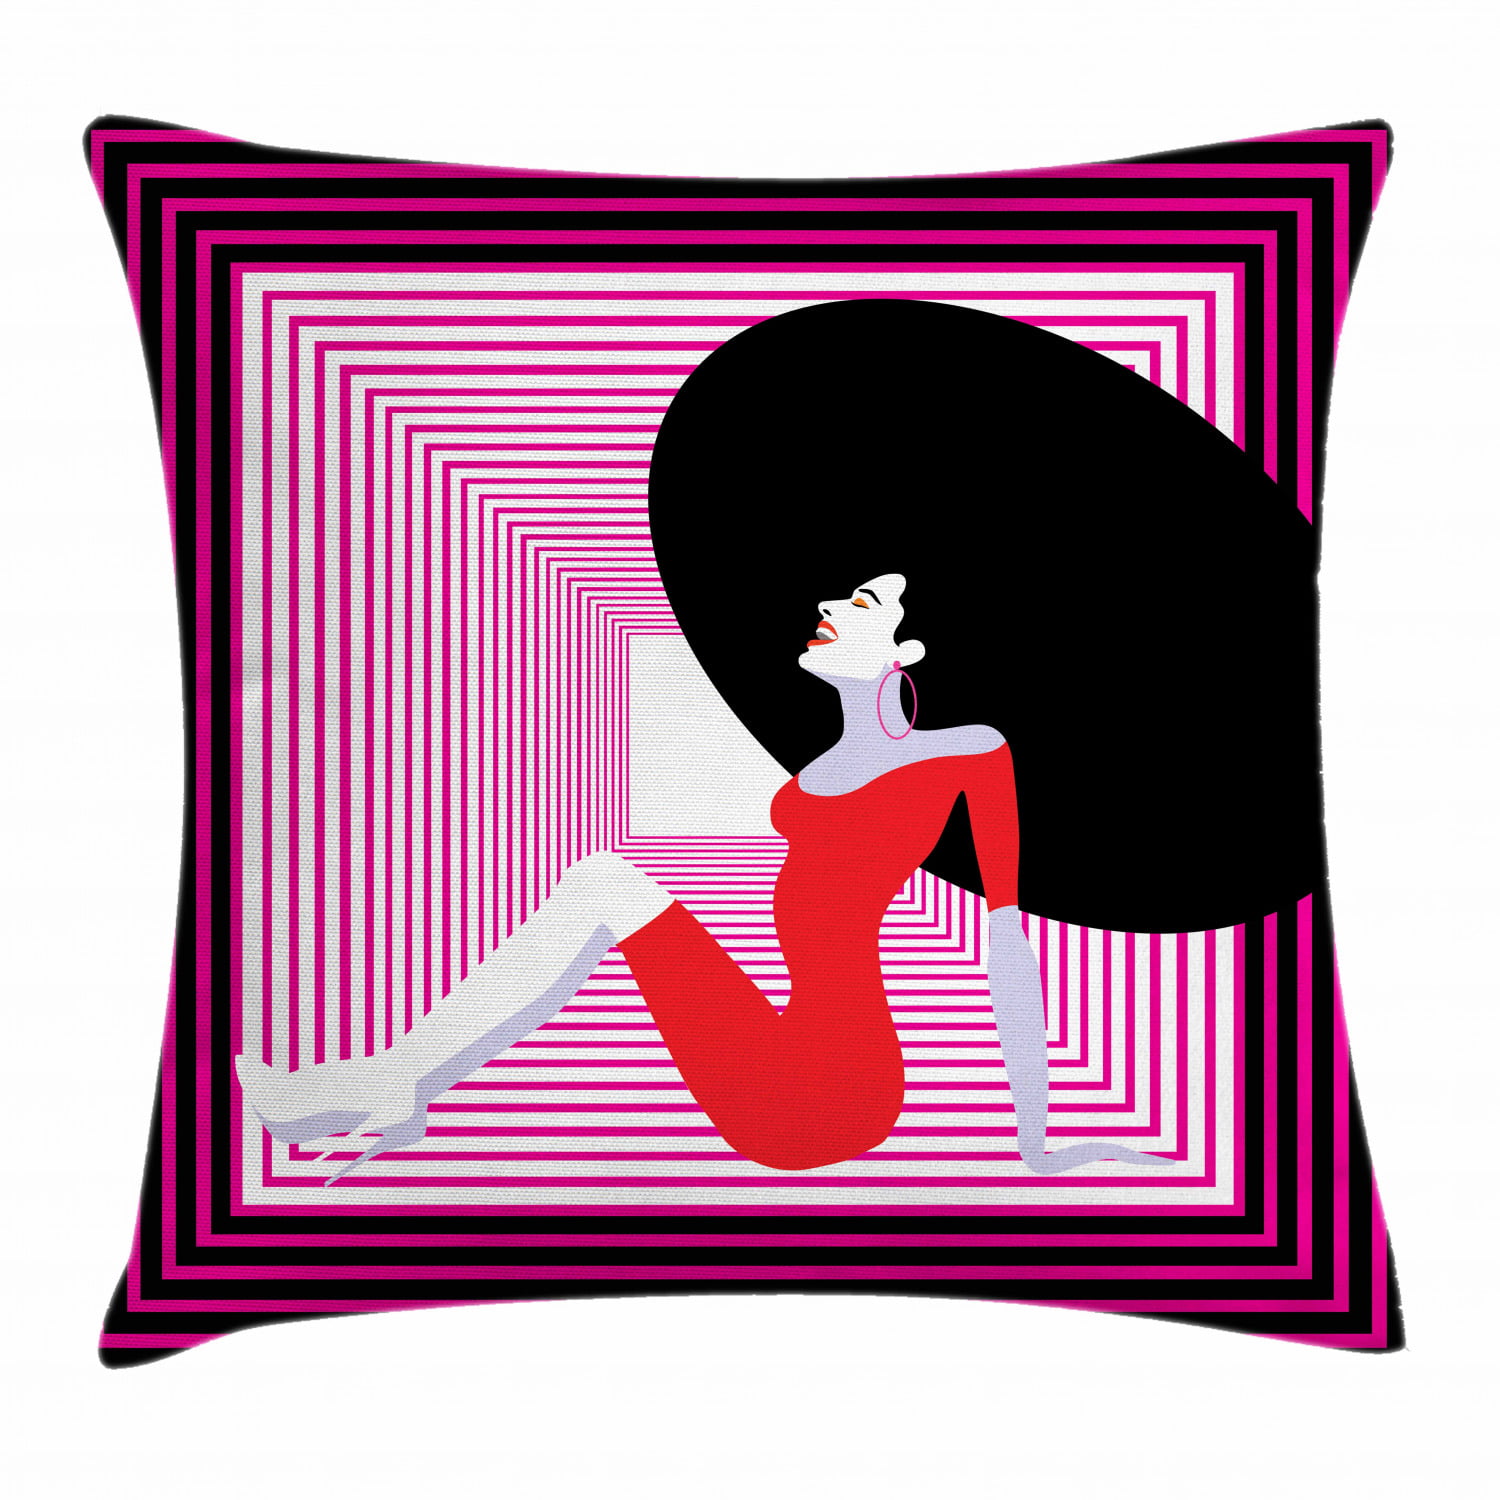 Comic Books Stuff Women Whispering-I Really Love Gaming-Comic Pop Art Throw Pillow Cool Computer Game Multicolor 16x16 Comic